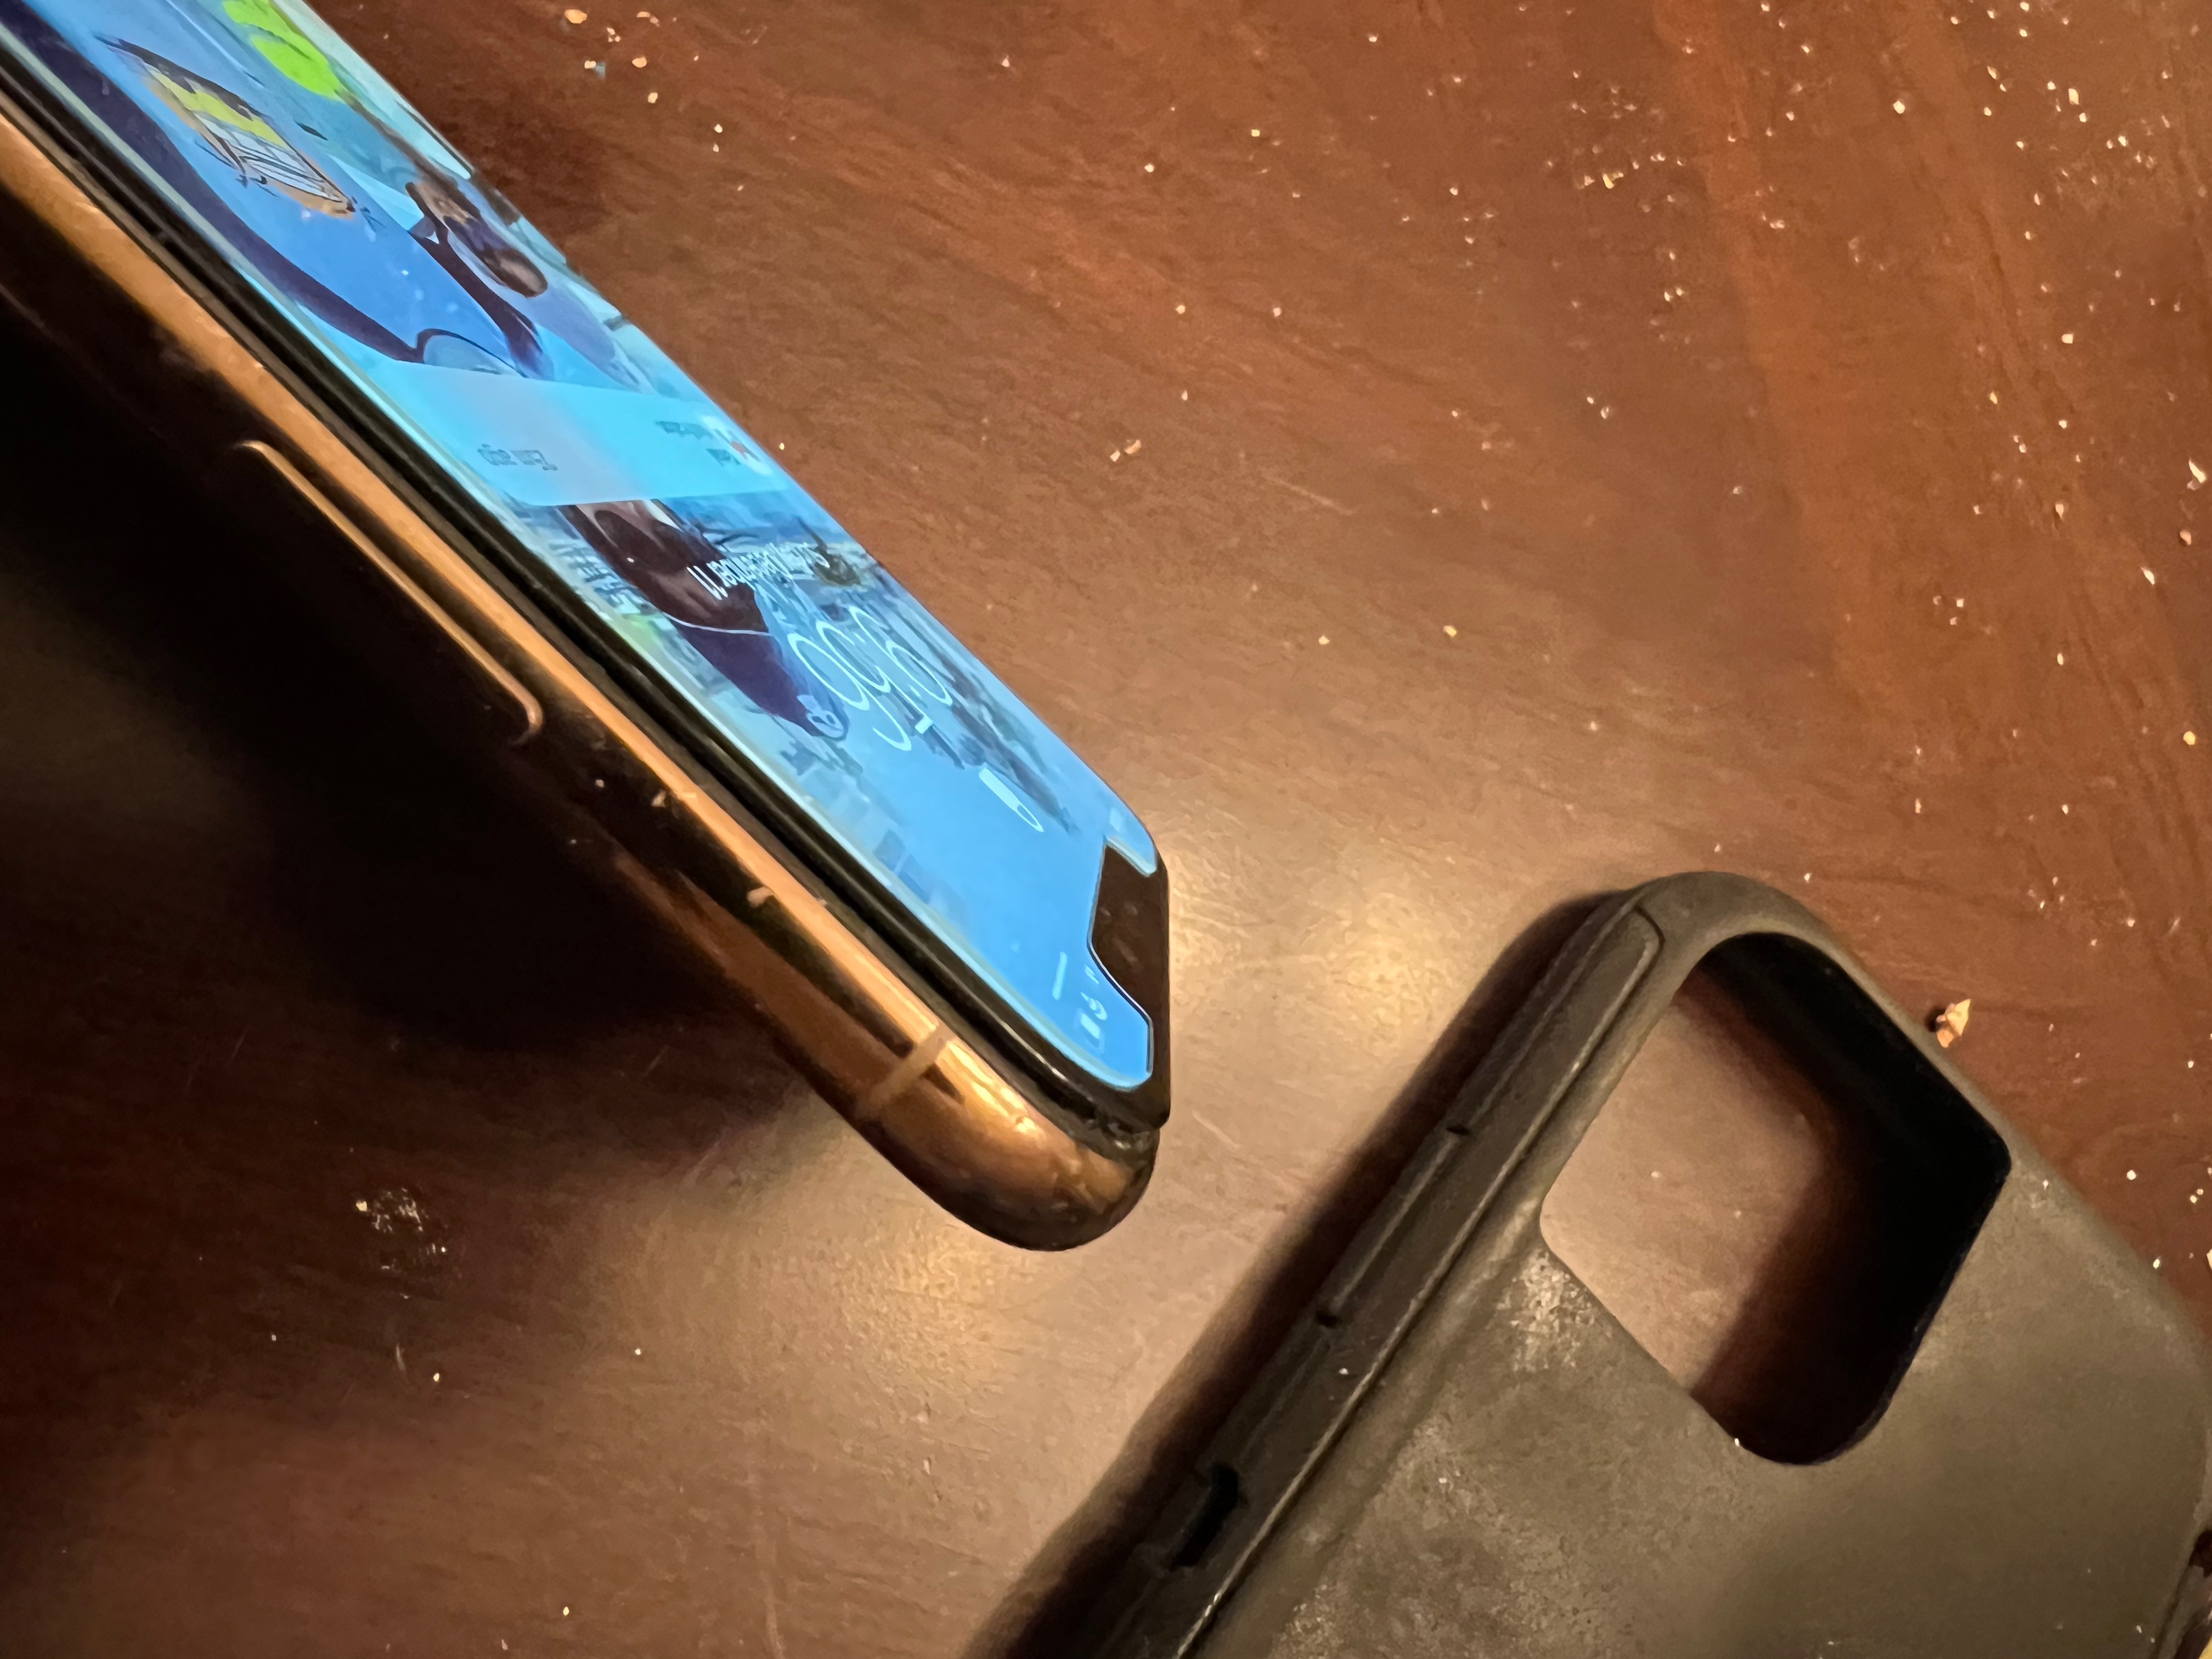 Portico eksegese Overgivelse Iphone 11pro screen popped out. - Apple Community